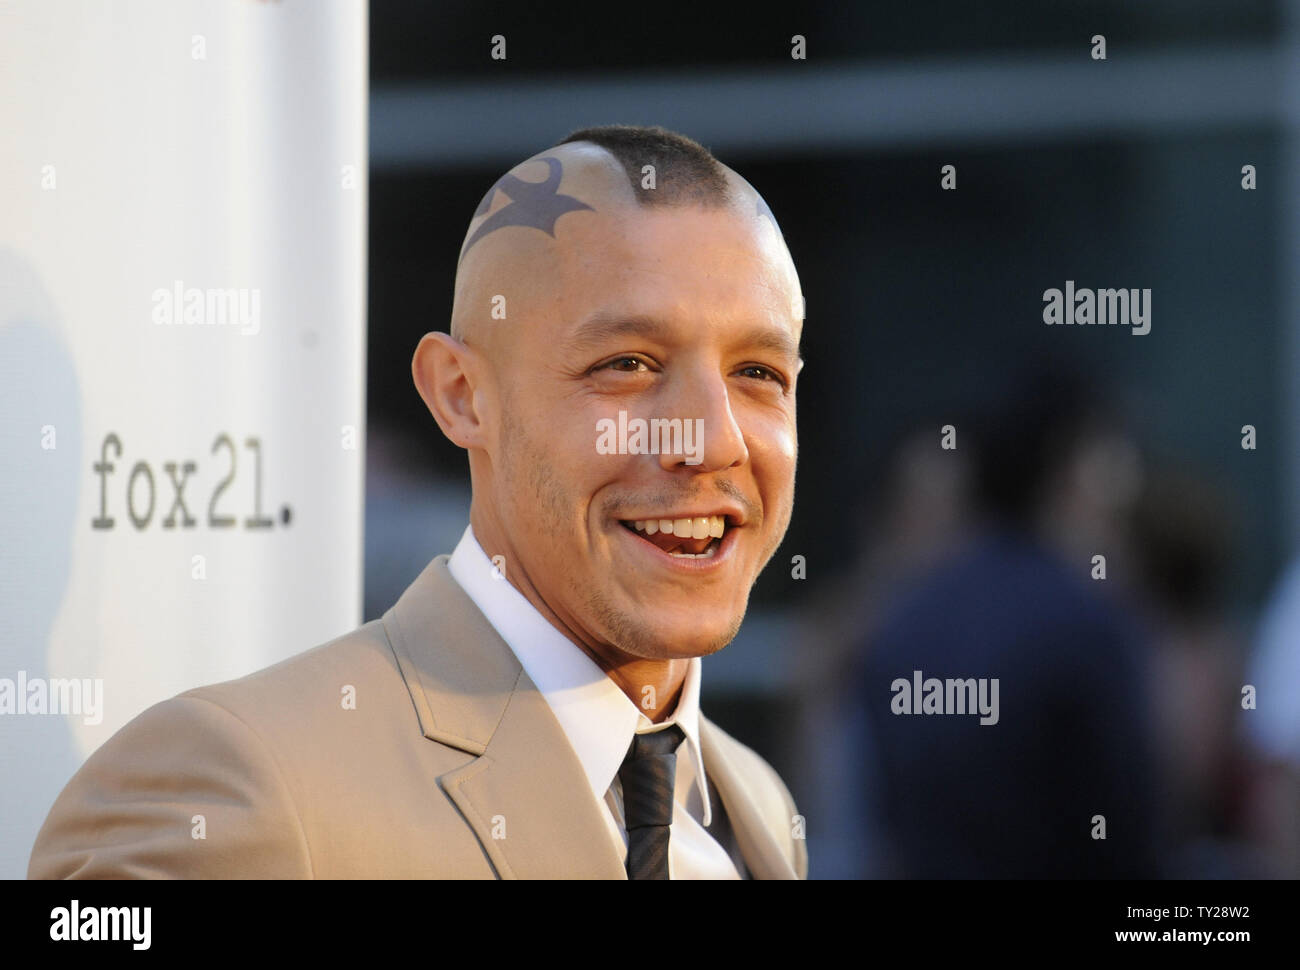 Cast member Theo Rossi attends the Sons of Anarchy, Season 4 premiere screening at the Arclight Theatre in the Hollywood section of Los Angeles on August 30, 2011.      UPI/Phil McCarten Stock Photo